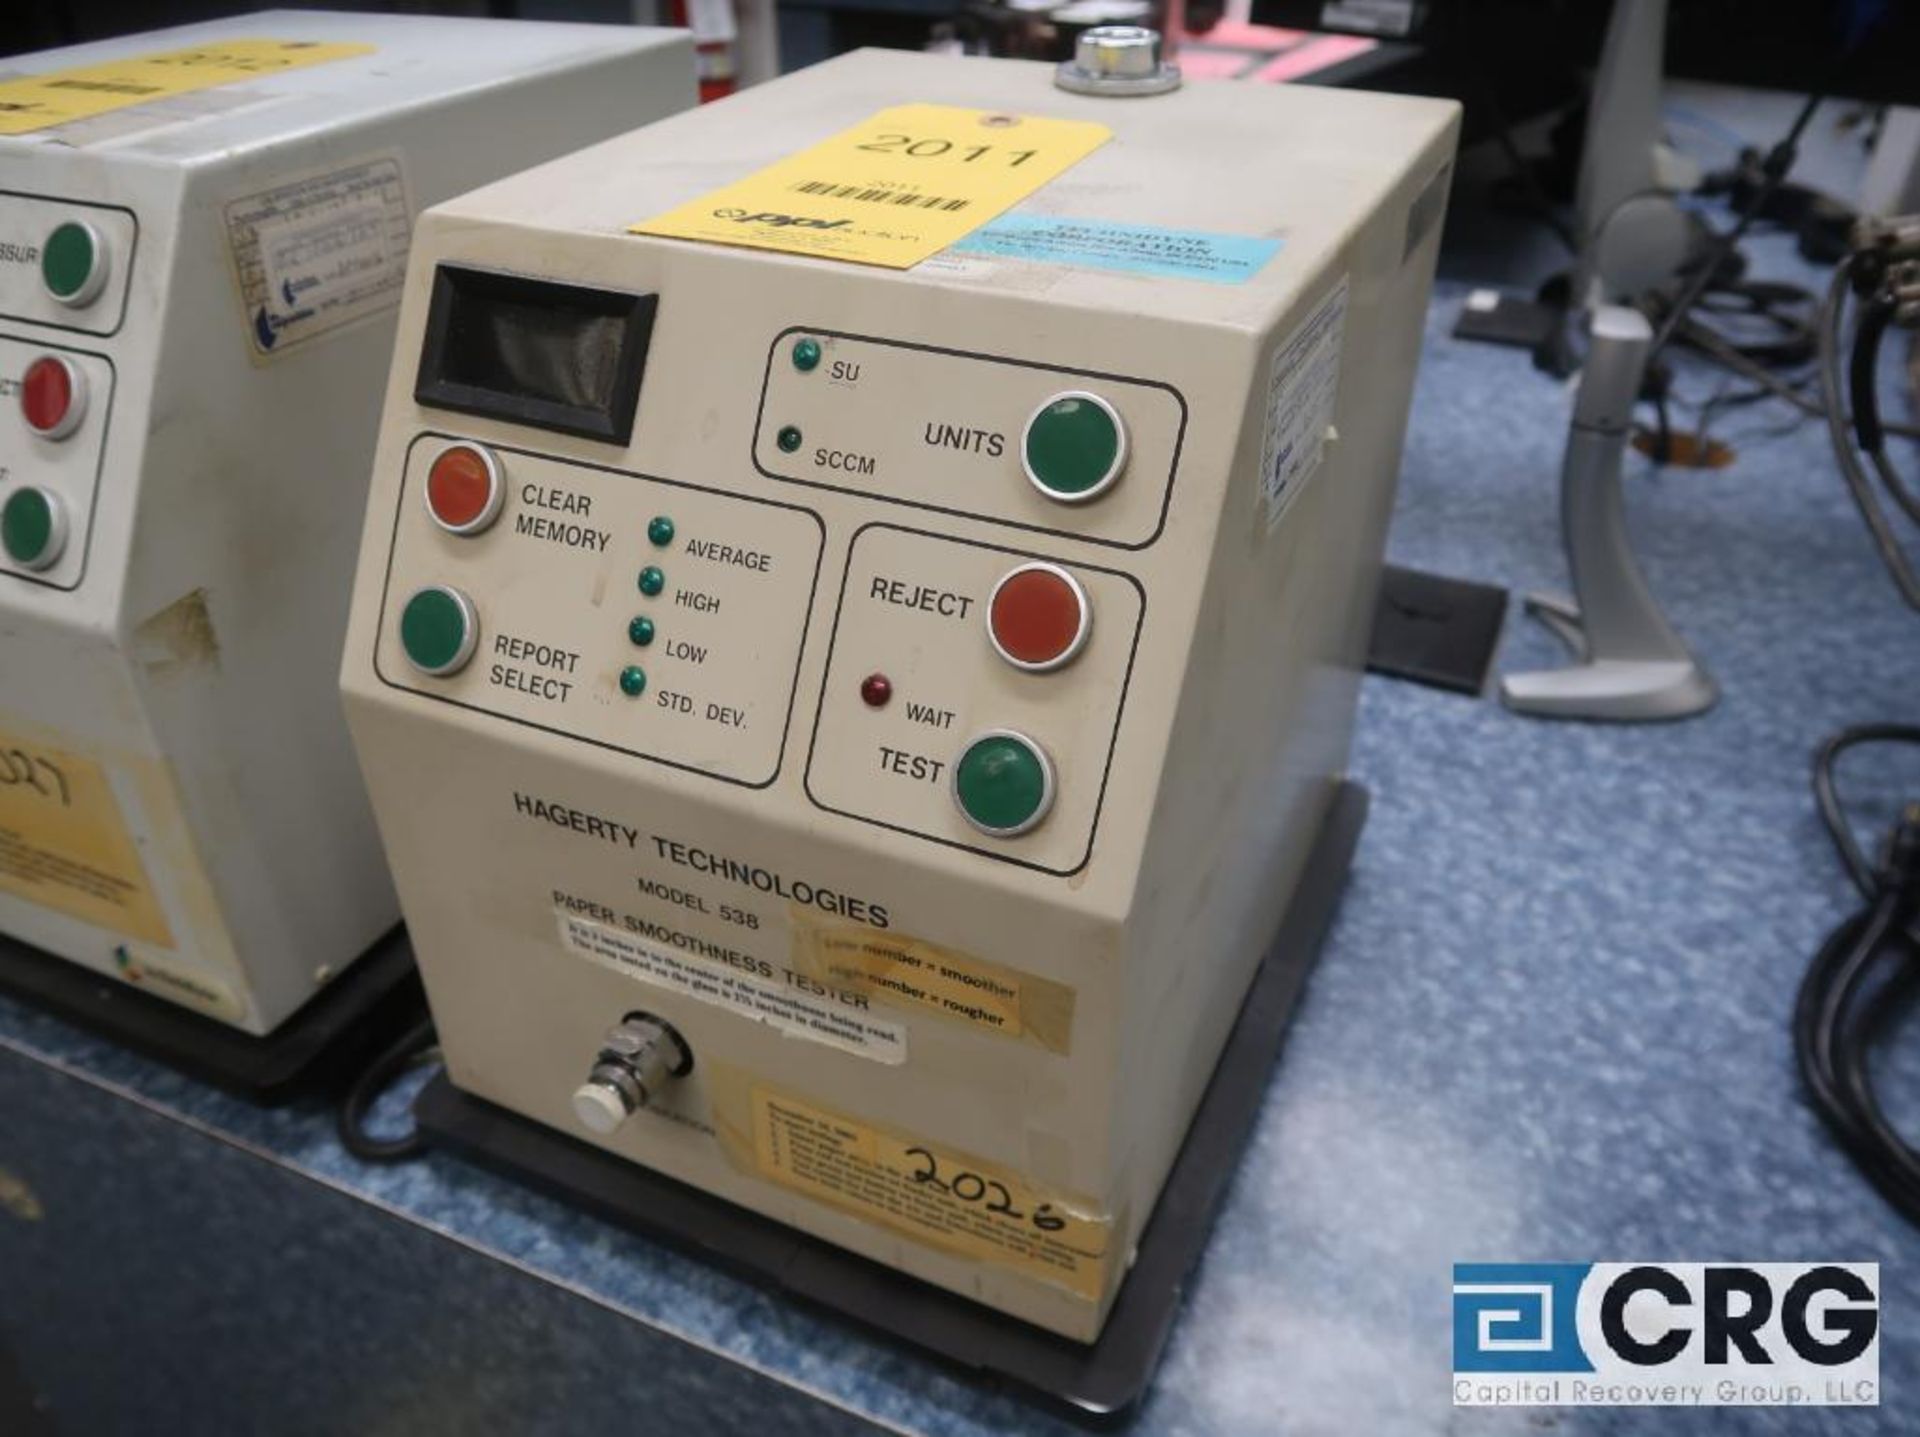 Hagerty Technologies model 538 paper smoothness tester